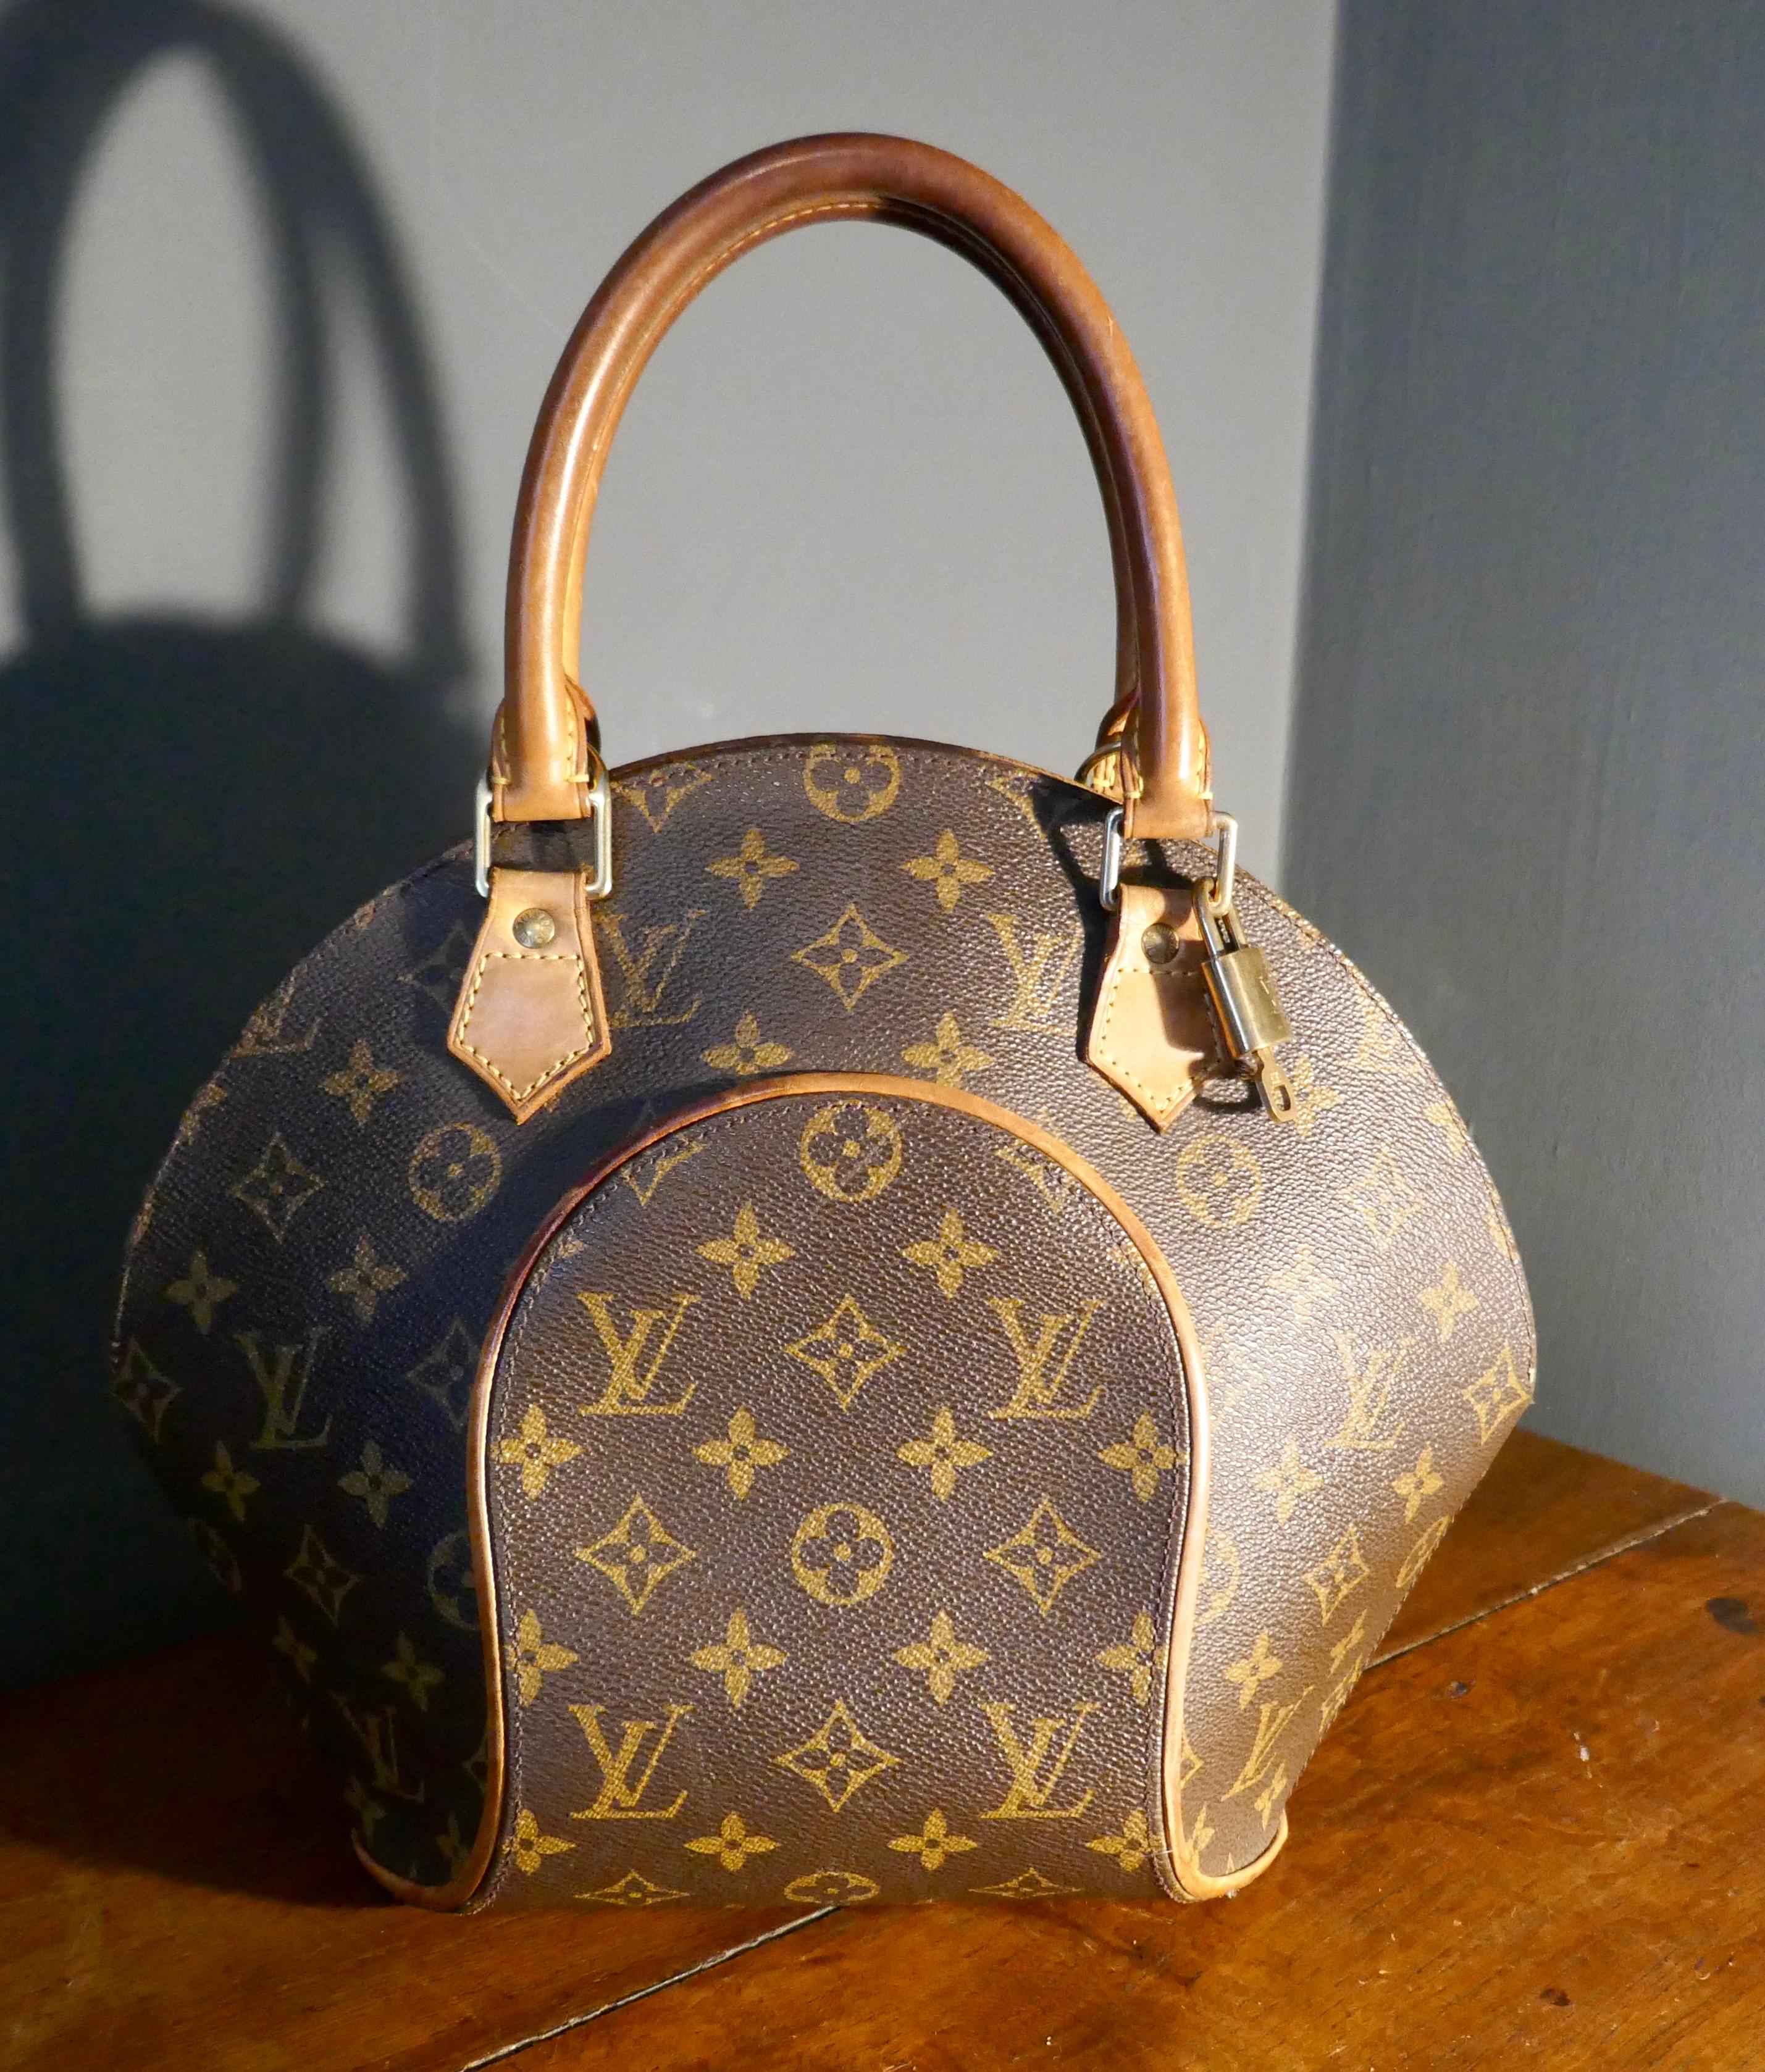 Vintage 1990s Louis Vuitton Ellispe MM Hand Bag

The Ellipse MM is a stiff bag featuring rolled vachetta handles, made in Monogram canvas with vachetta trim, a double top zip closure, an interior flat pocket, and a D-ring, monogram studs, original